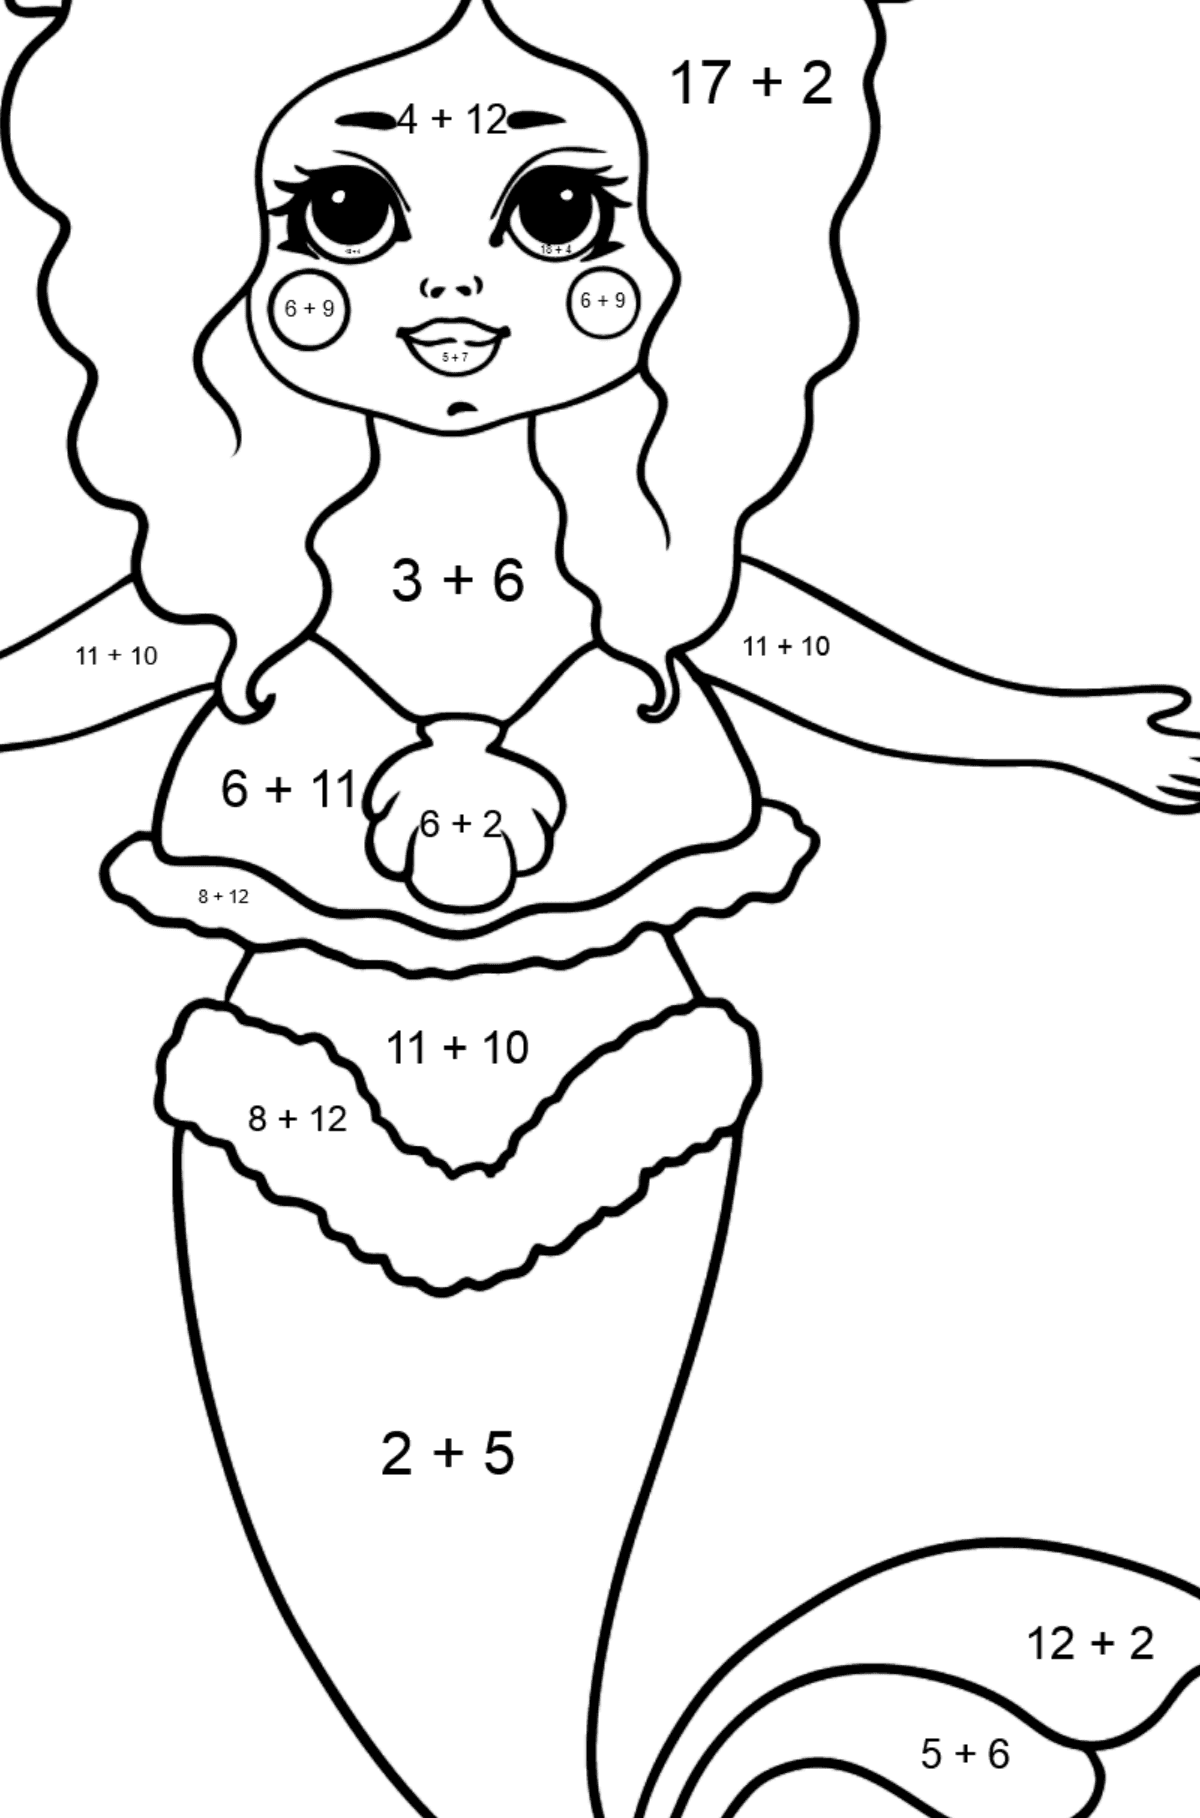 Mermaid with Yellow Tail coloring page - Math Coloring - Addition for Kids